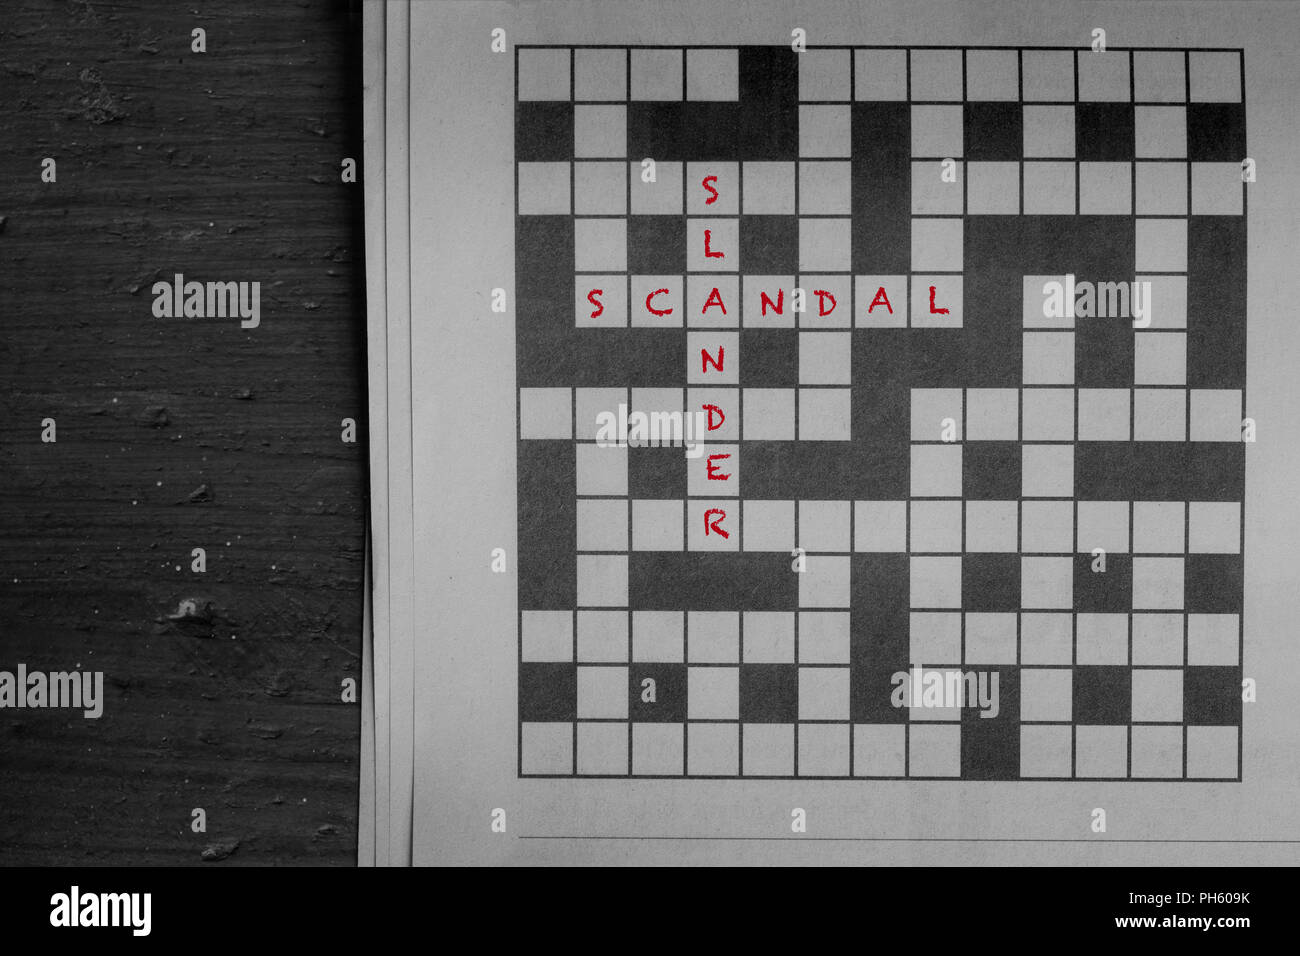 Scandal and slander written in red as solutions to a newspaper crossword puzzle on wood Stock Photo